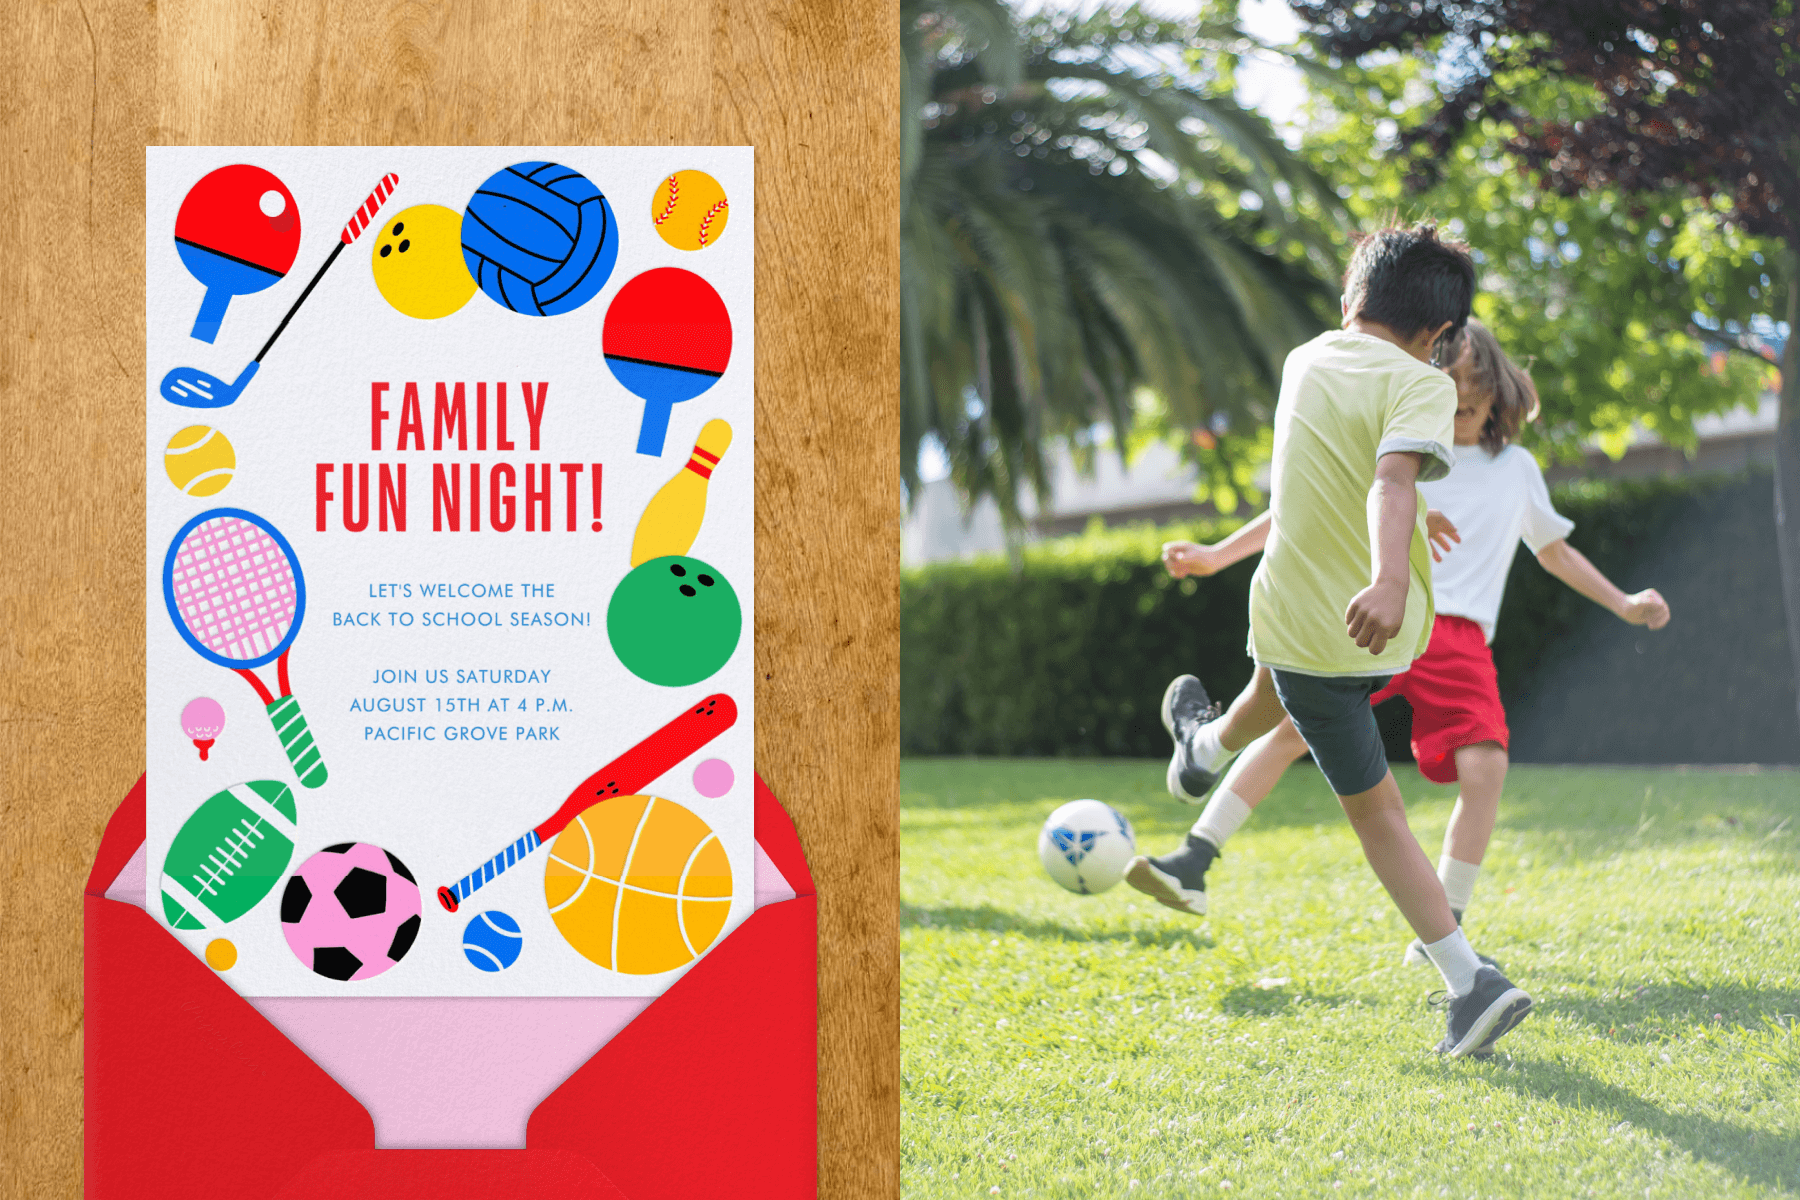 Left: A family fun night invitation with illustrations around the border of colorful ball and racquet sports. Right: Two children play soccer in a yard with a palm tree behind them.